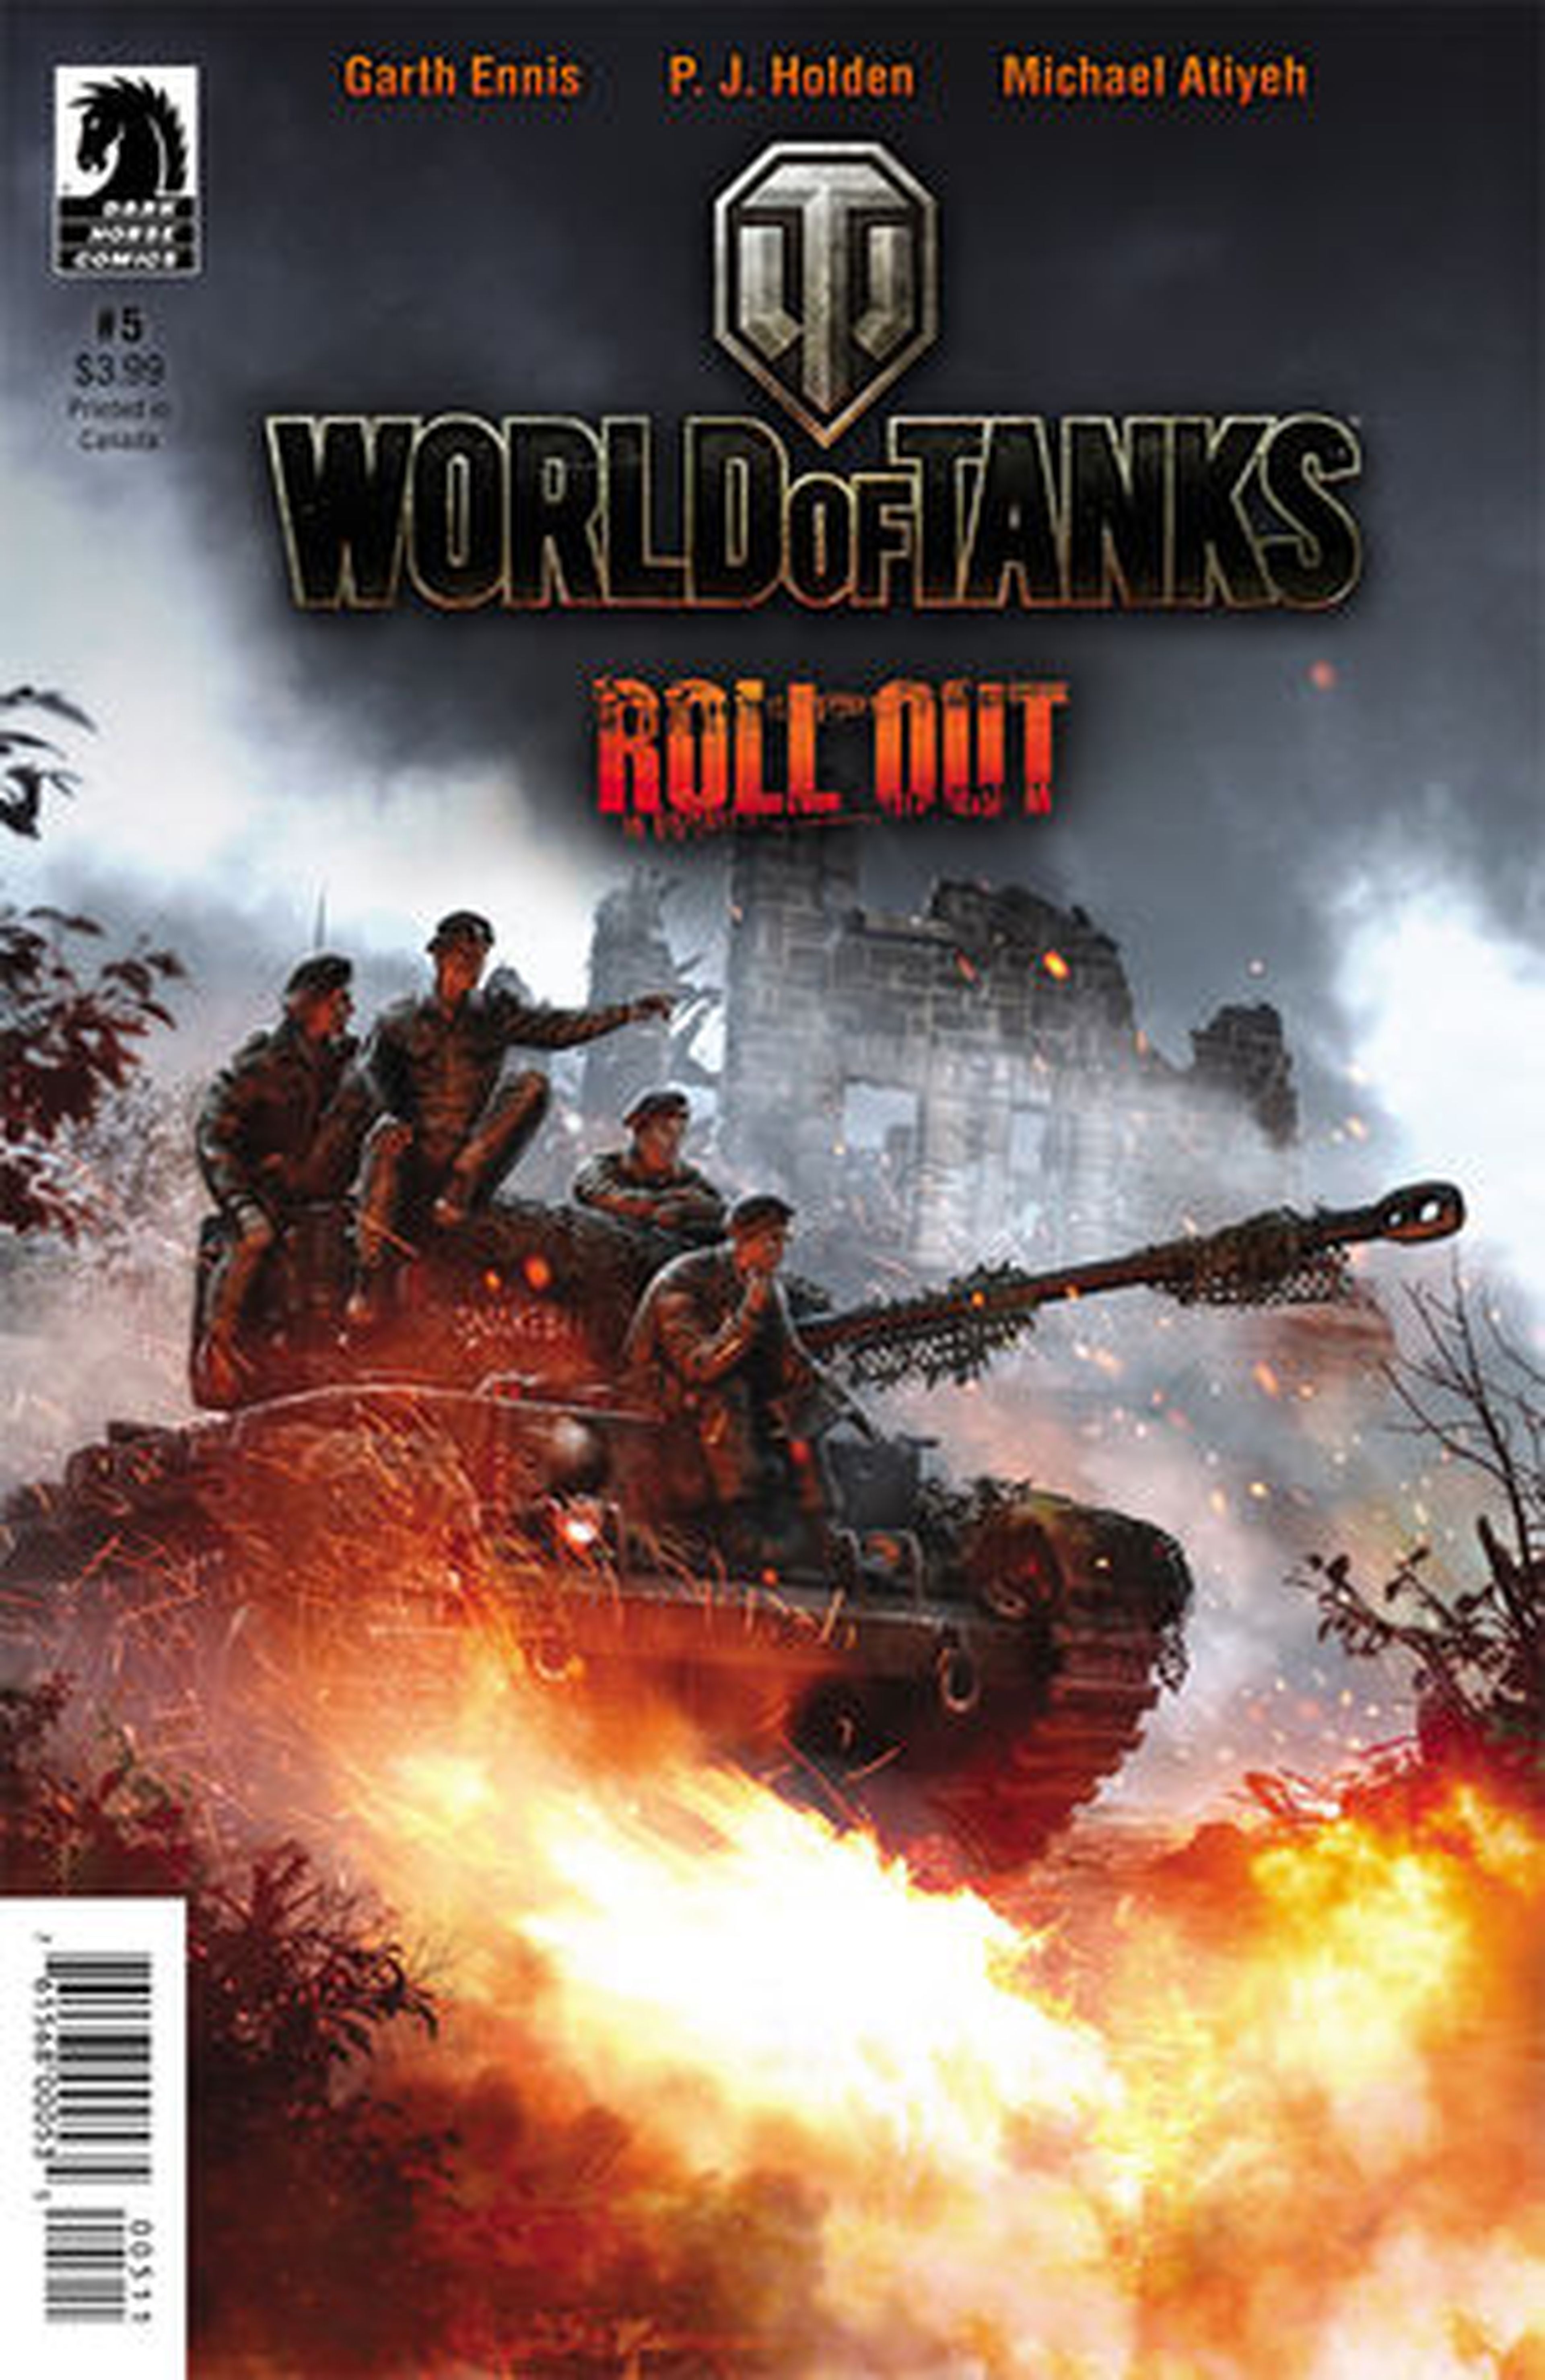 World of tanks roll out 3